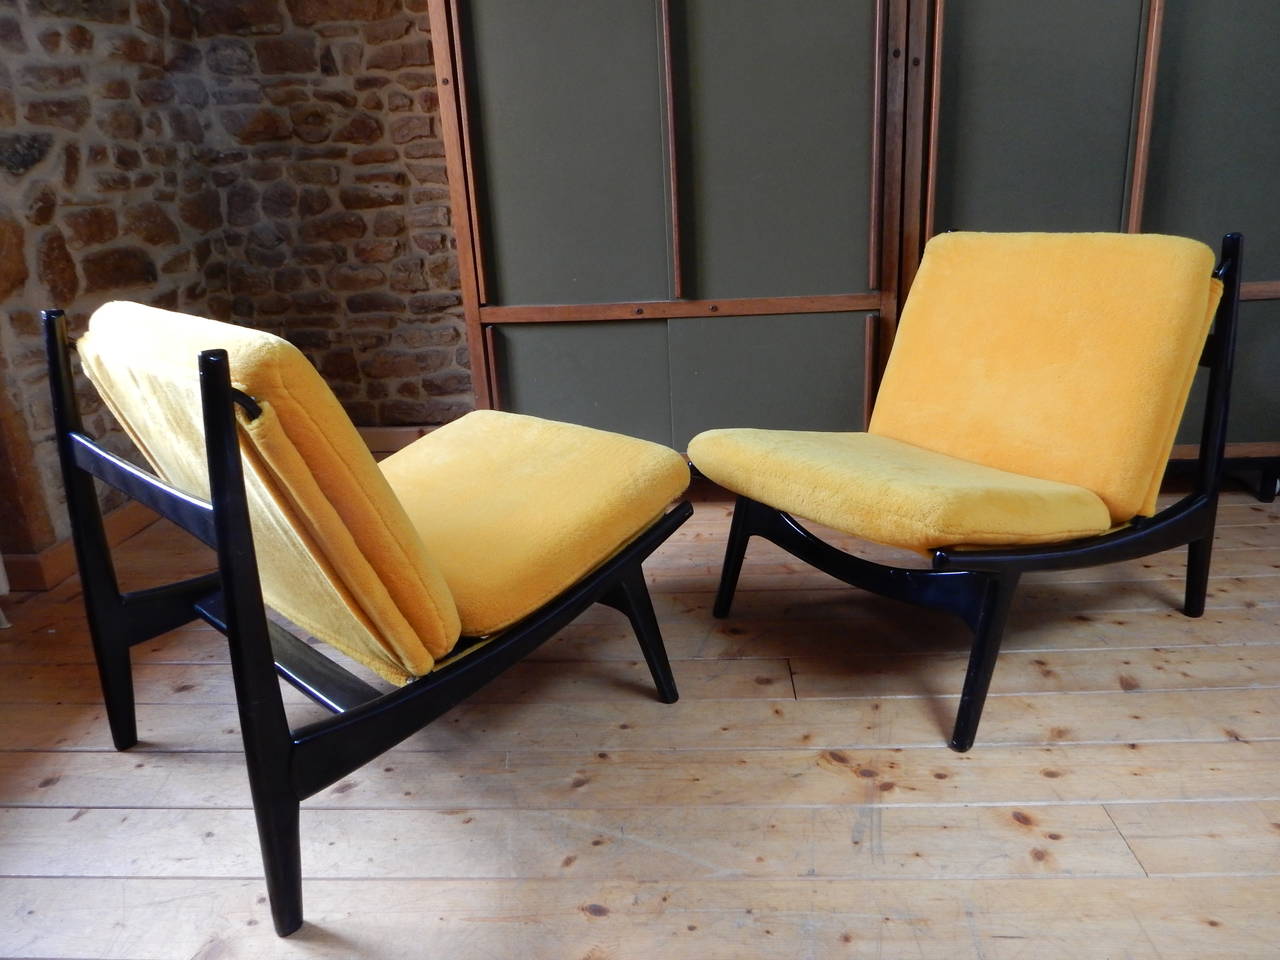 Joseph Andre Motte Pair of Armchairs for Steiner 1